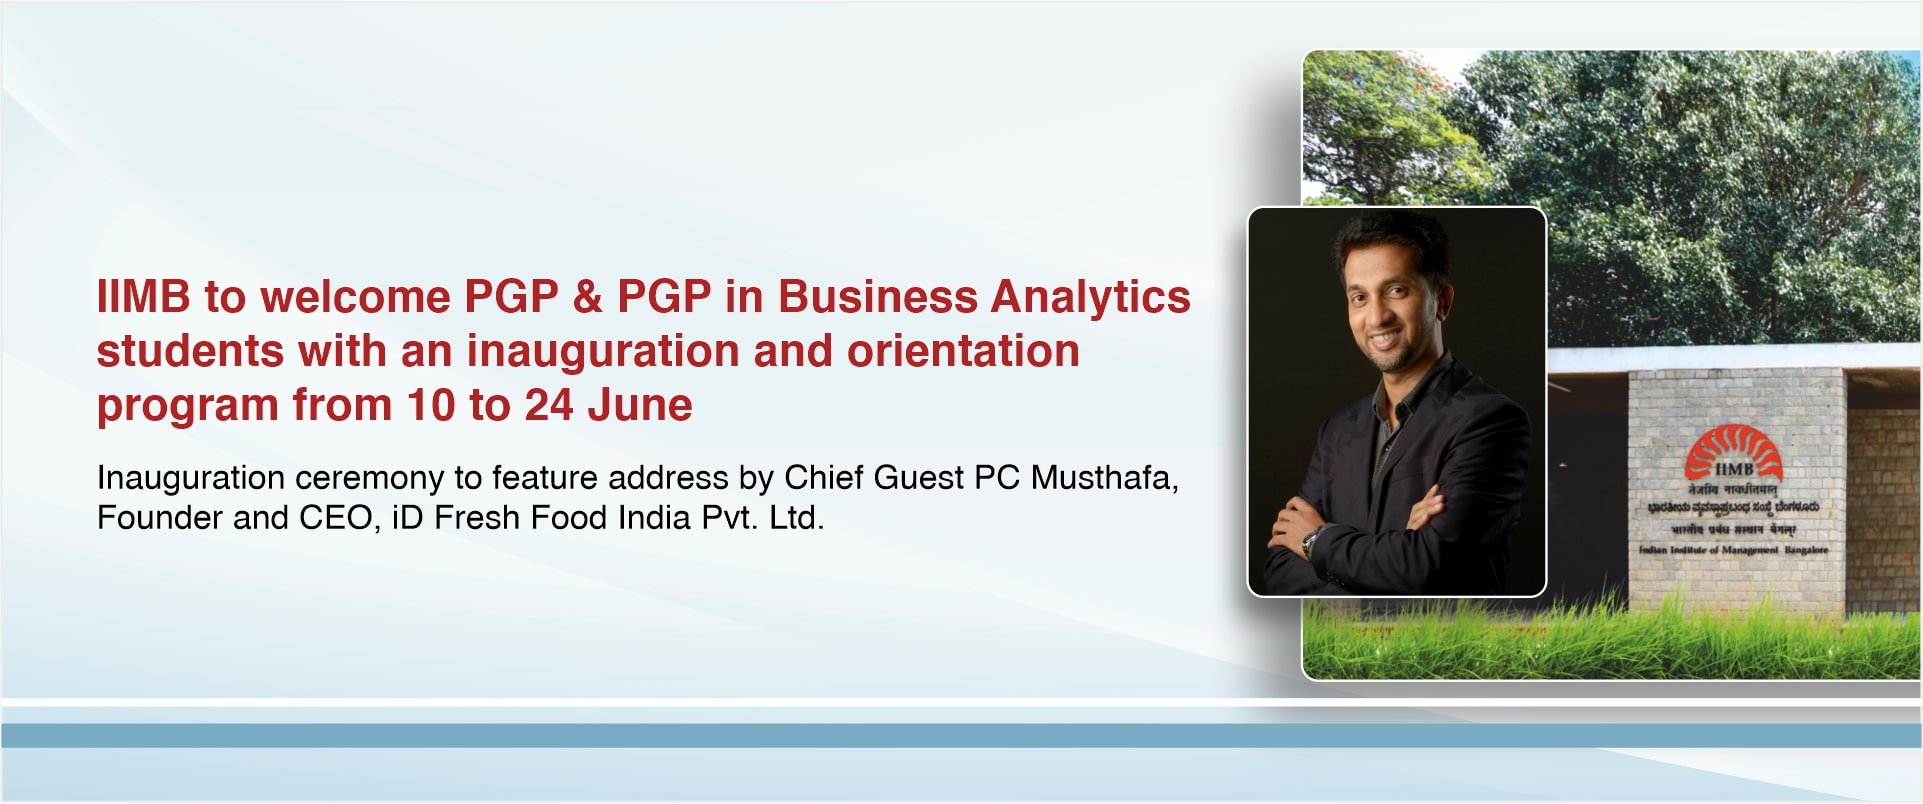 IIMB to welcome PGP & PGP in Business Analytics students with an inauguration and orientation program from 10 to 24 June 